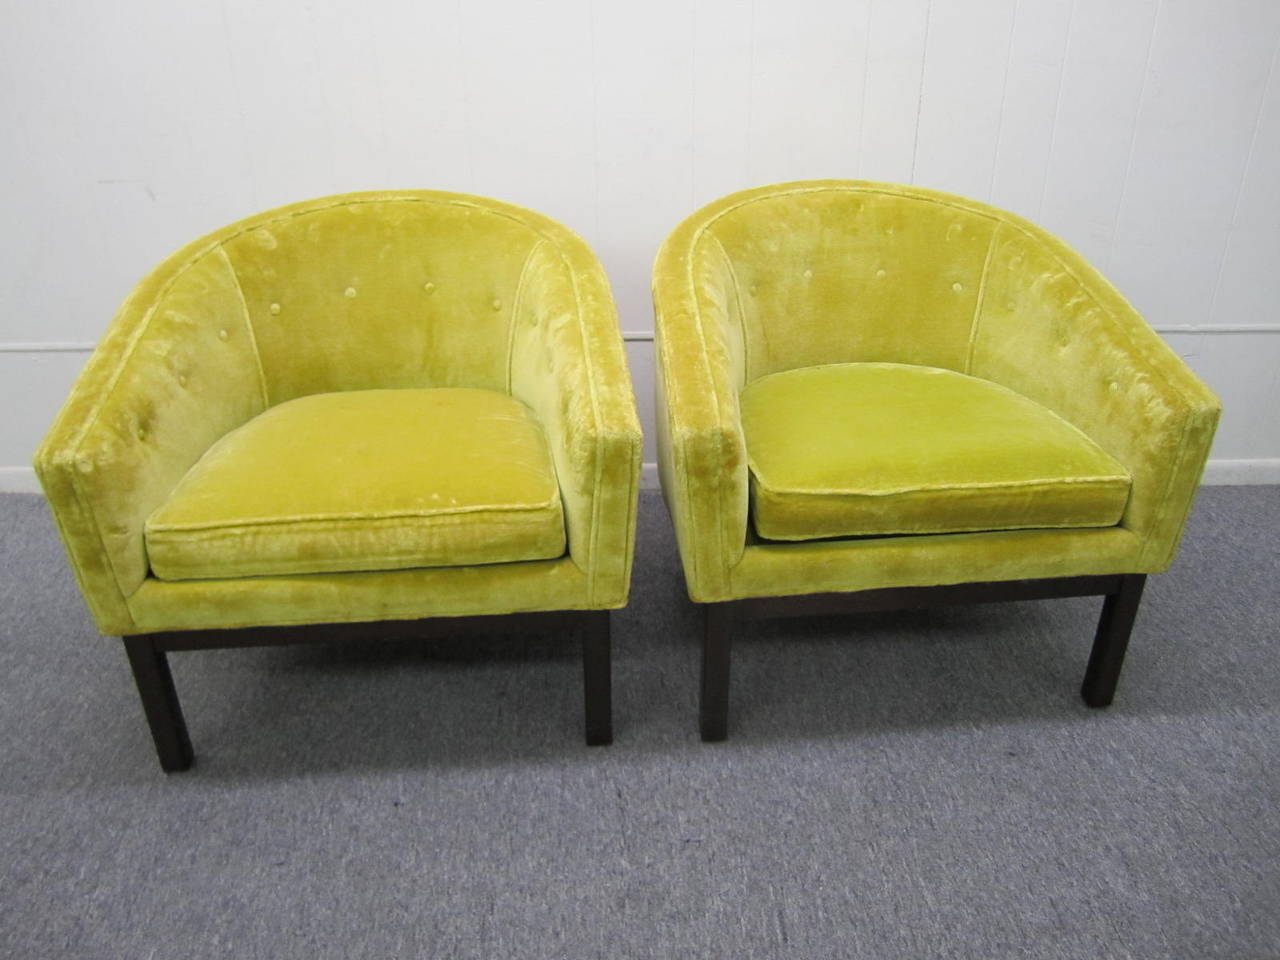 Fabulous pair of Harvey Probber style barrel back chairs.  Lightly tufted original yellow velvet upholstered seats sit on dark walnut bases.  Classic mid-century form with comfortable function.